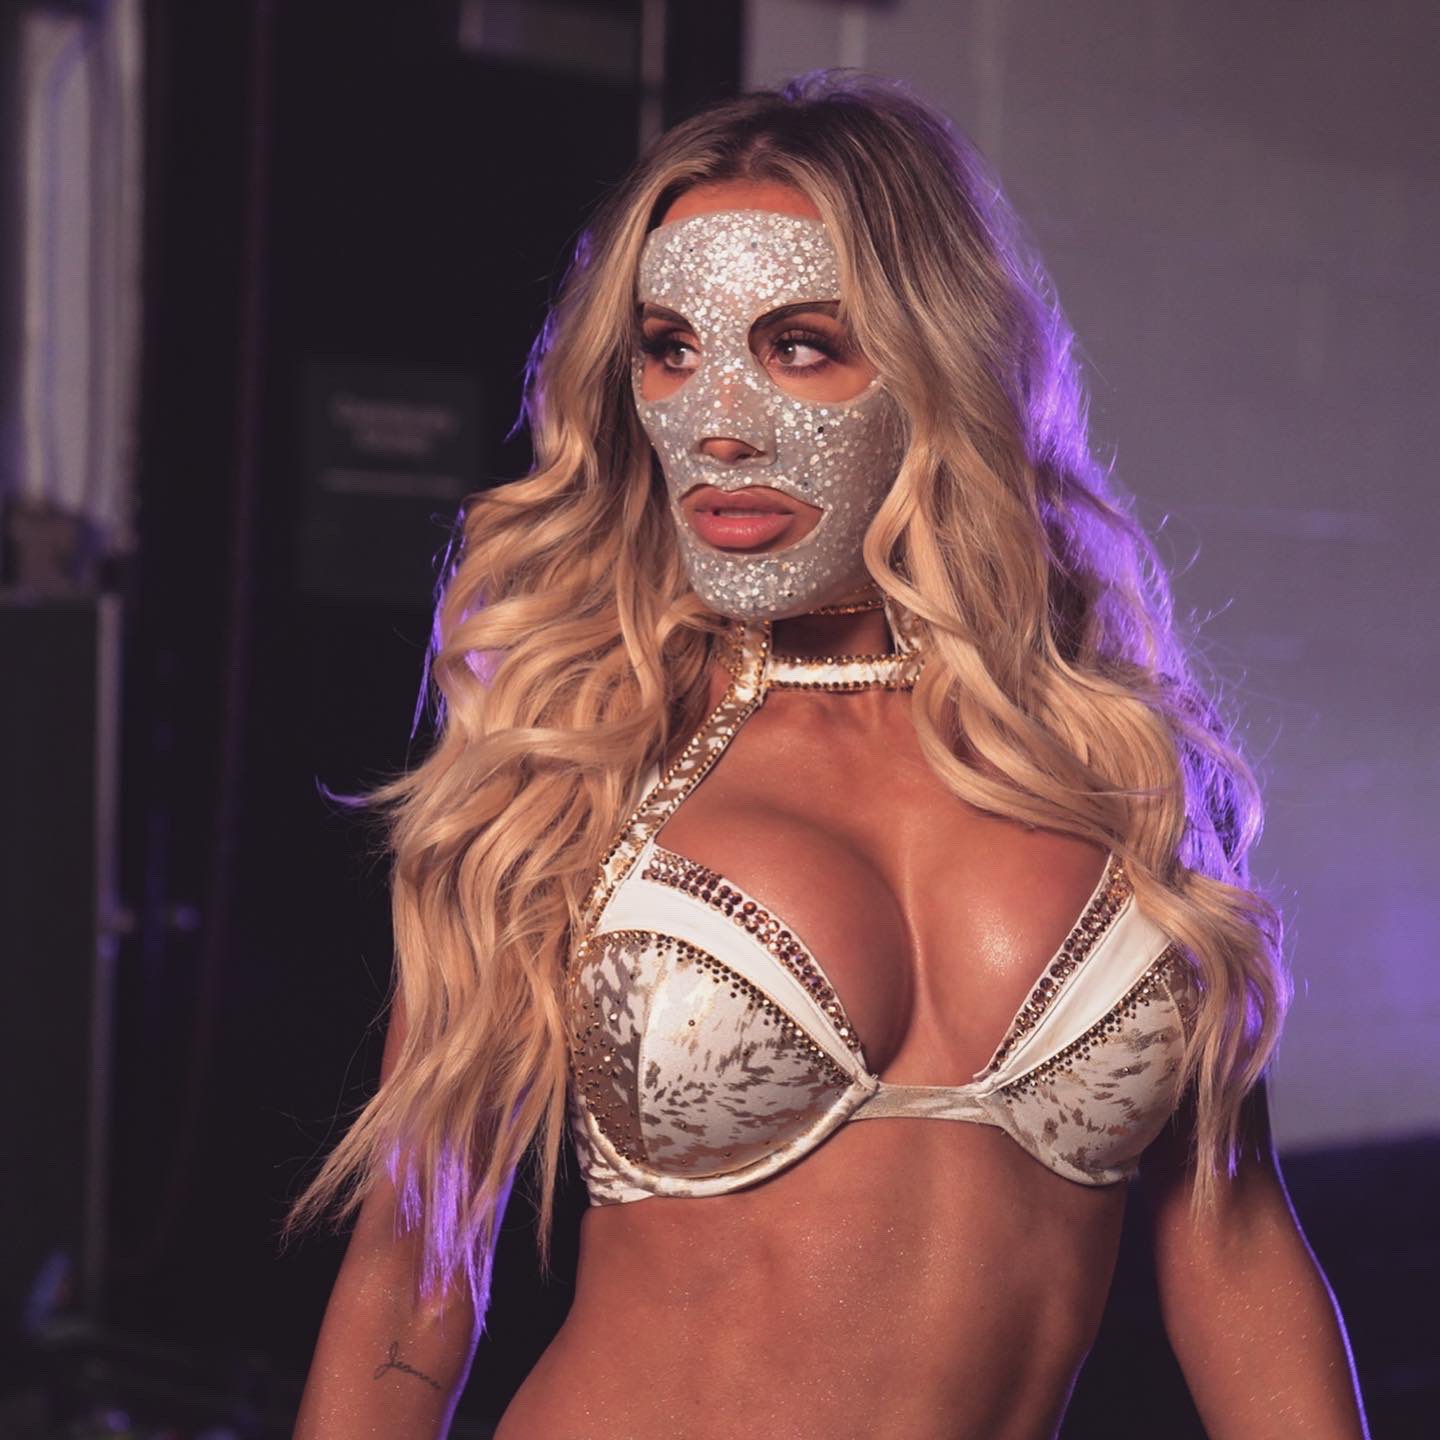 Wwe Smackdown Sexy Video - Carmella Shares Hot Photos From WWE Smackdown In Designer Mask